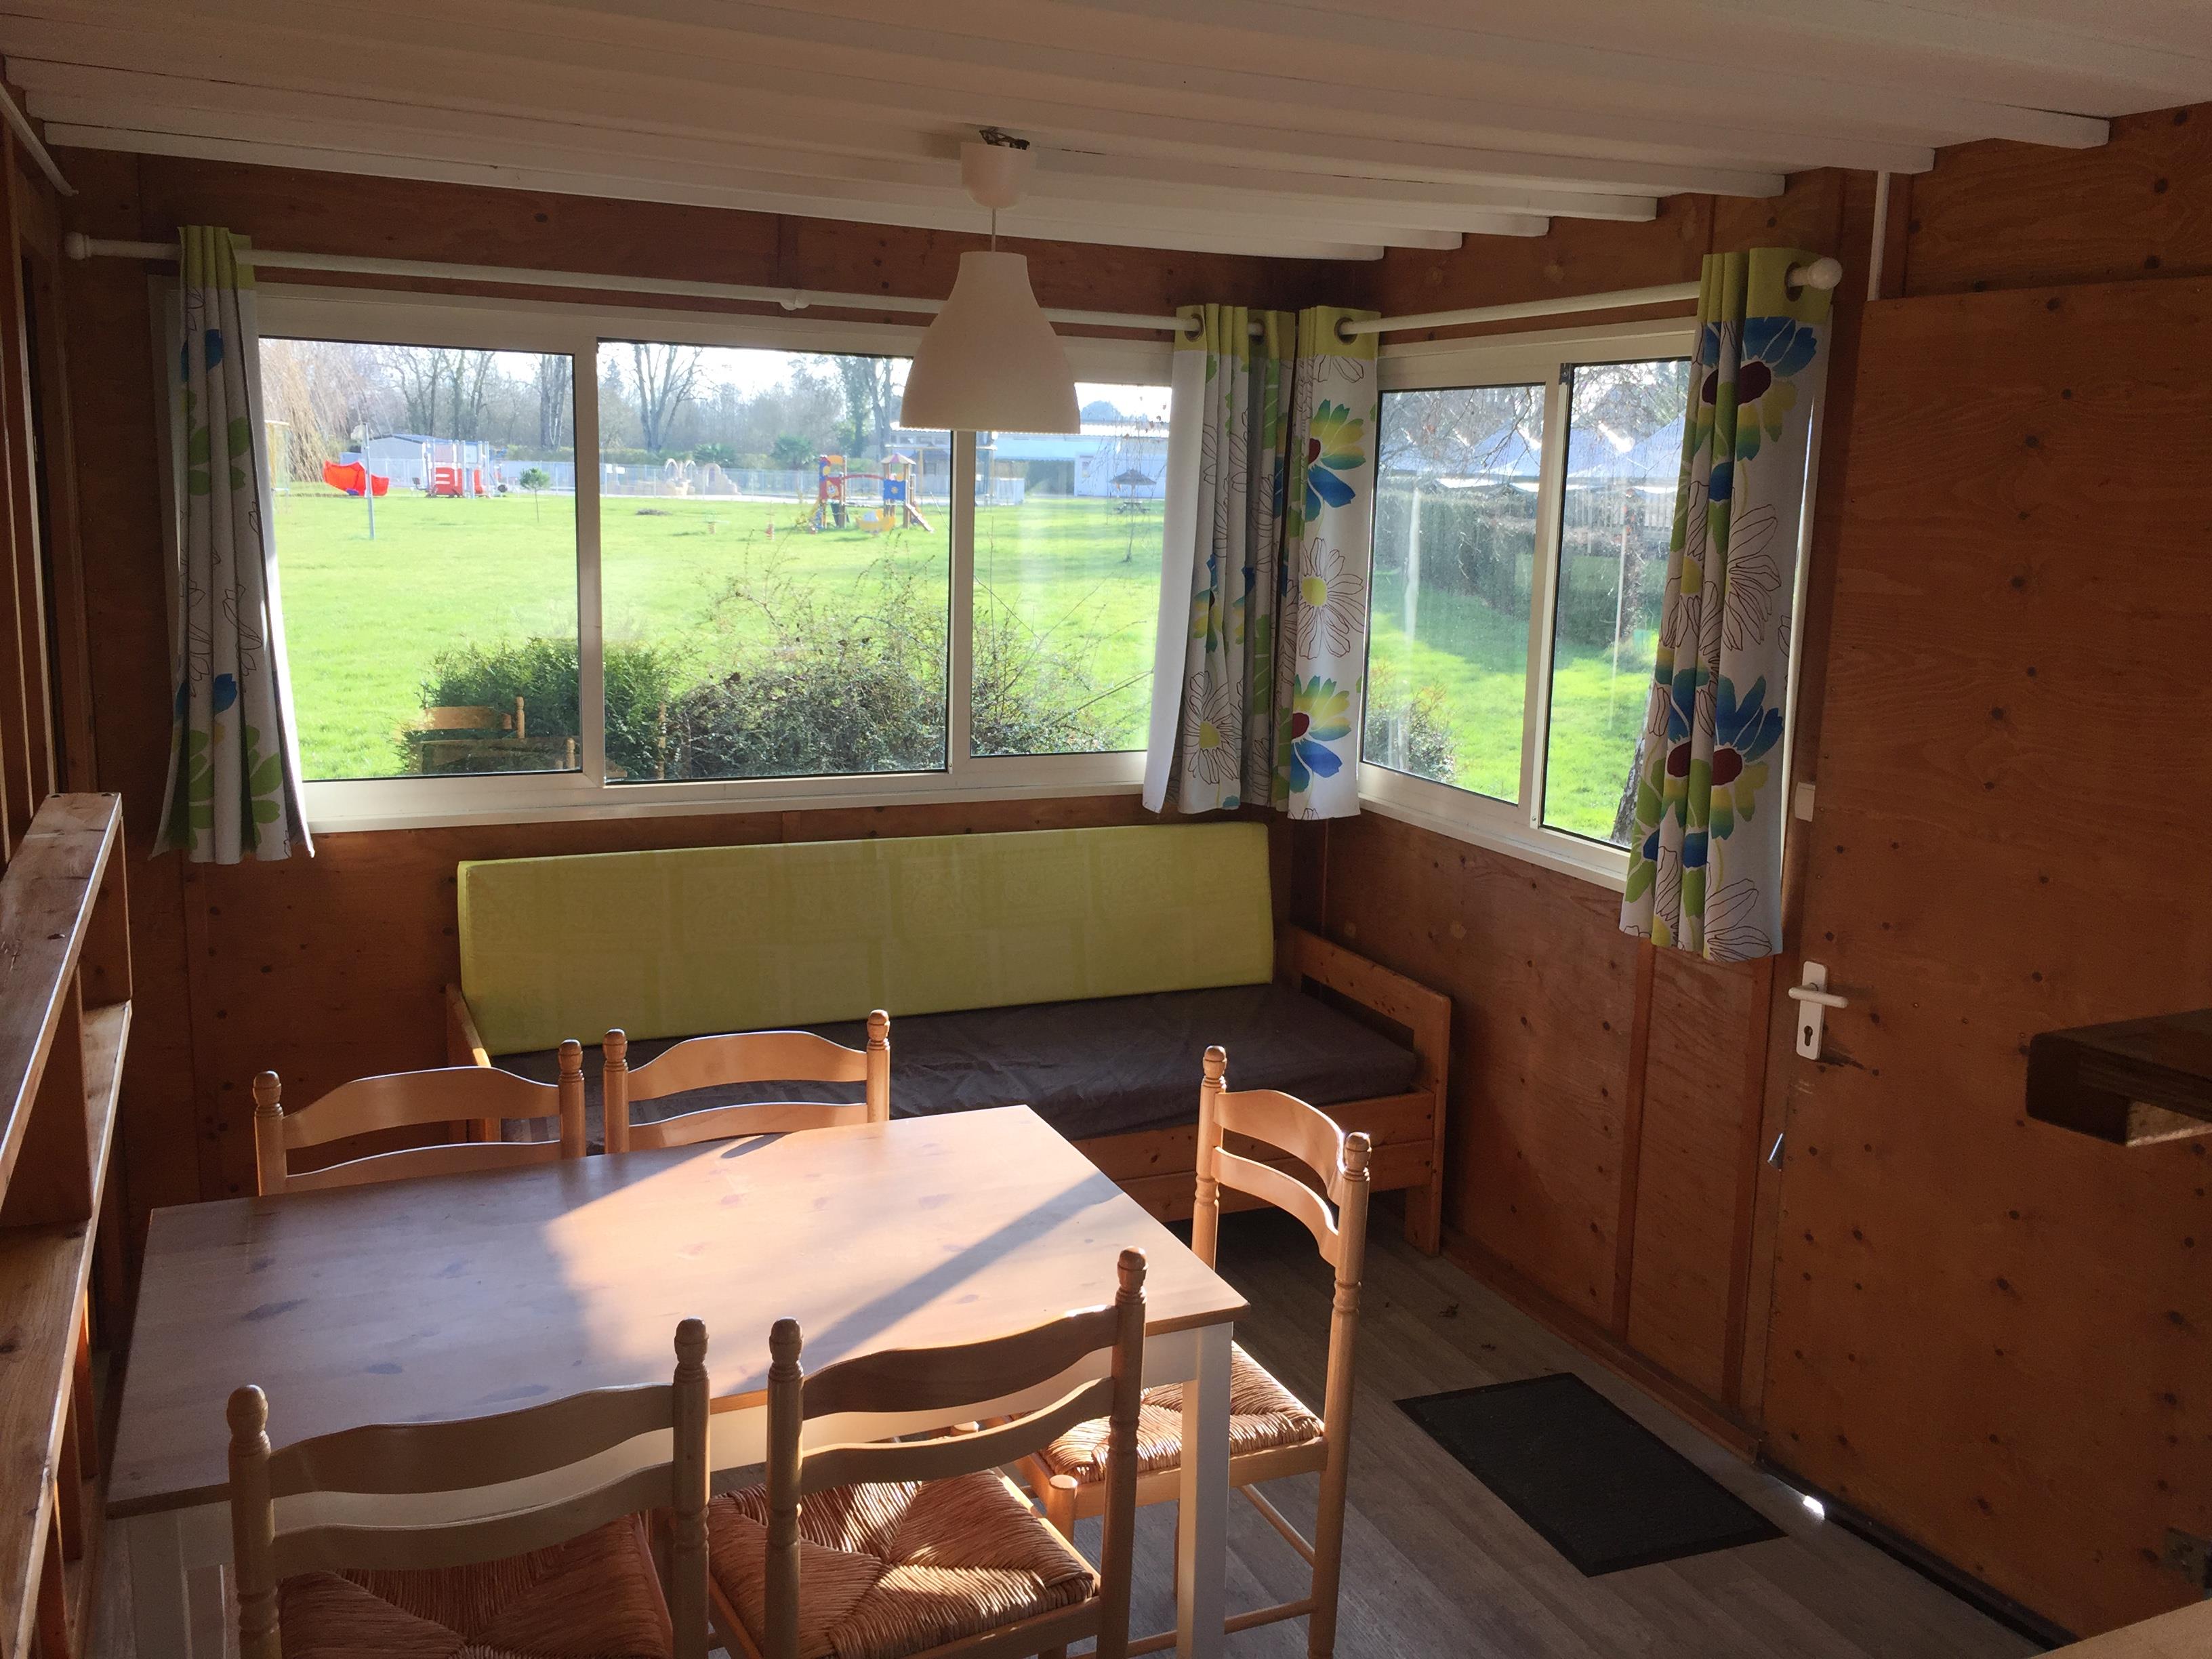 Location - Chalet Standard 30.25 M² (2 Chambres) - Camping Les Granges, Luynes